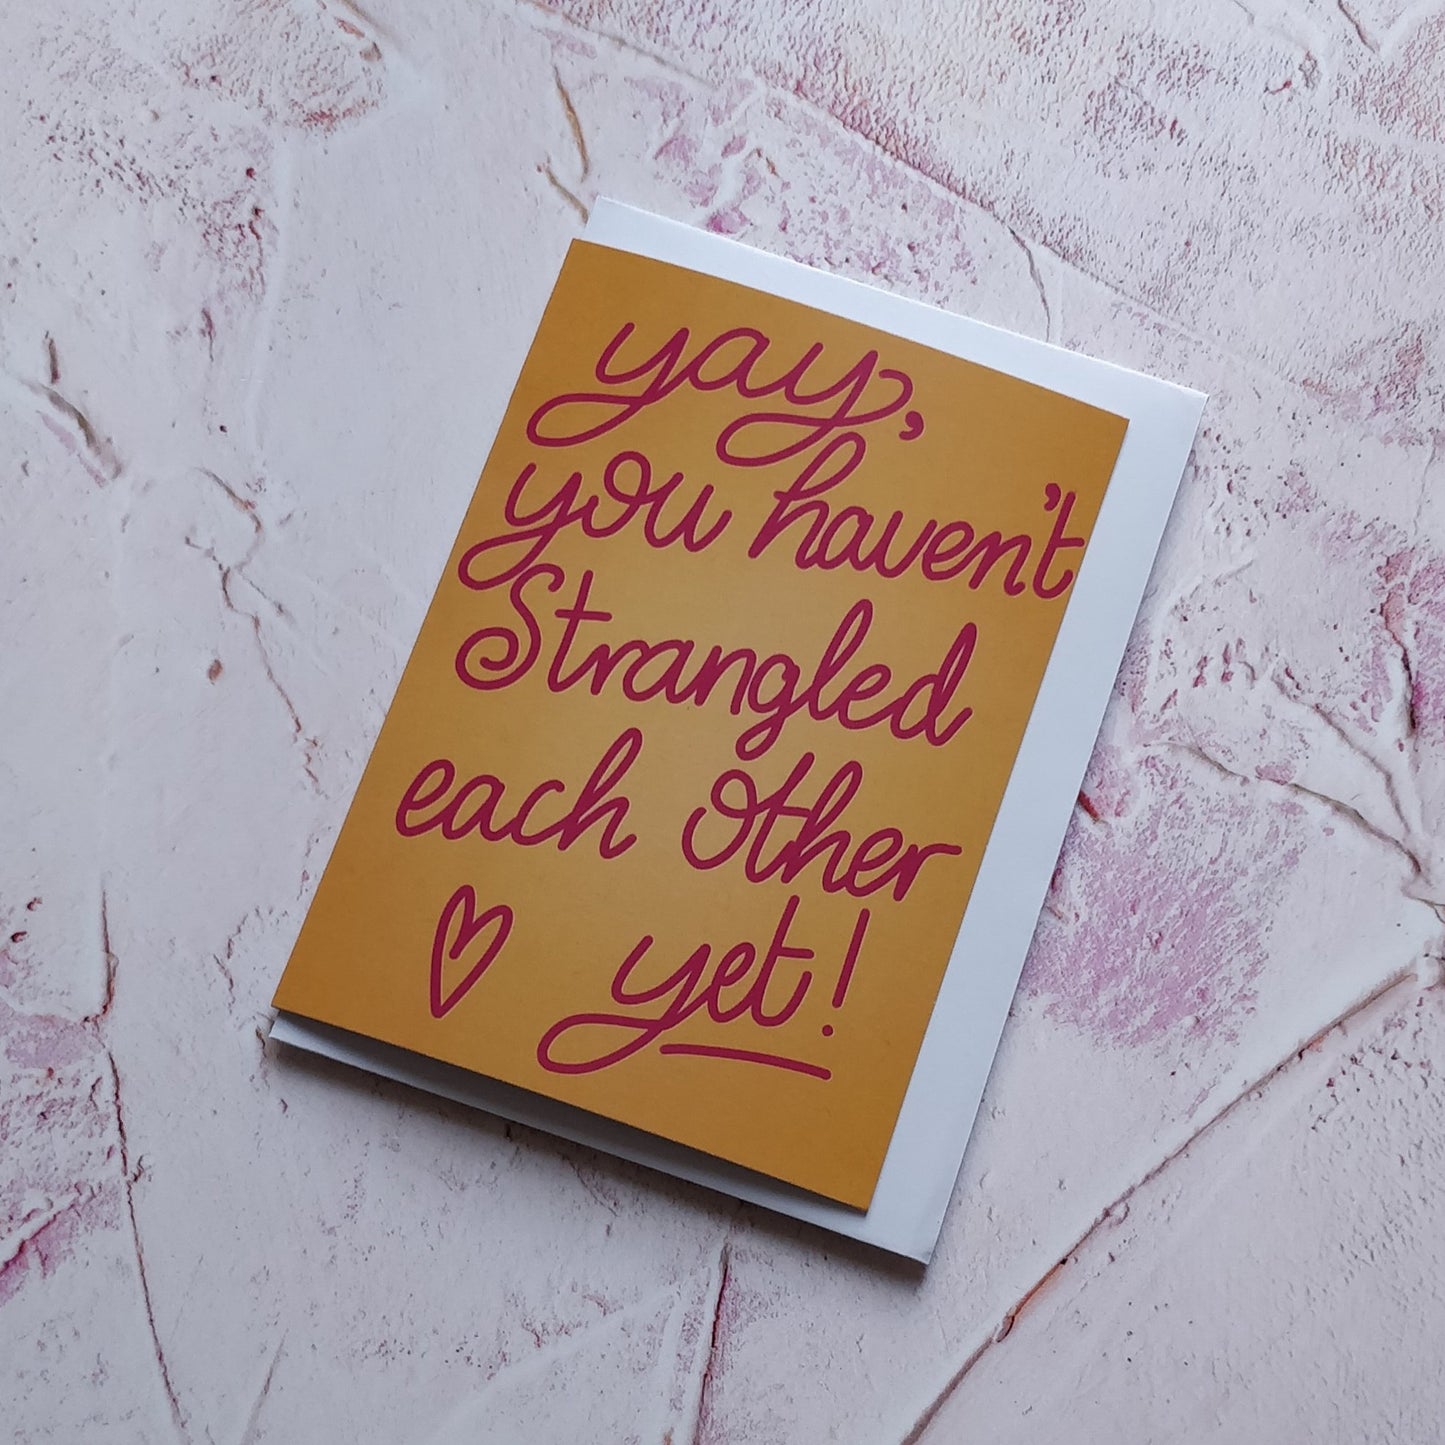 Yay, You haven't strangled each other yet Greeting Card - Fay Dixon Design